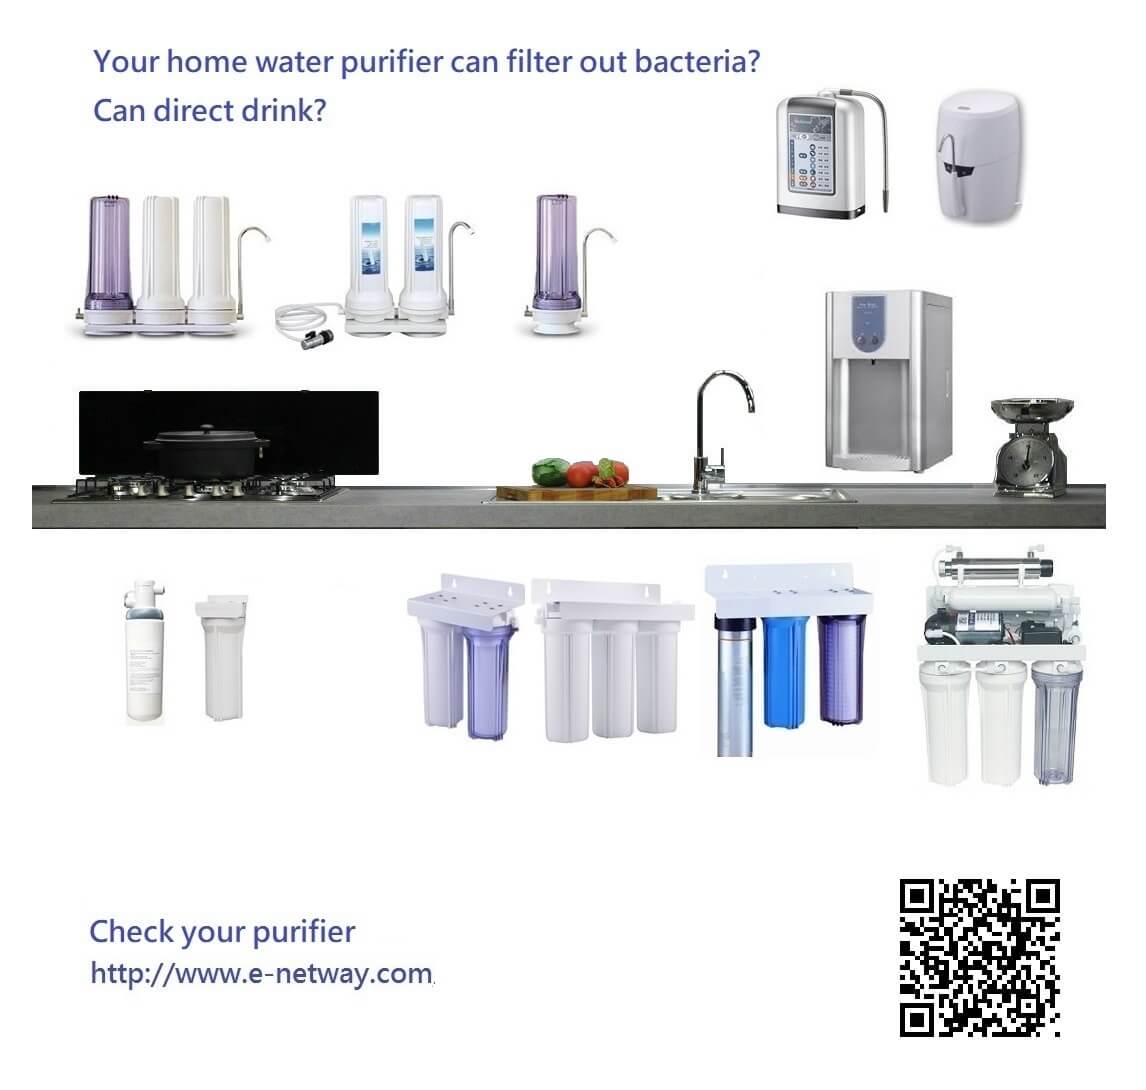 Check demestic water filter